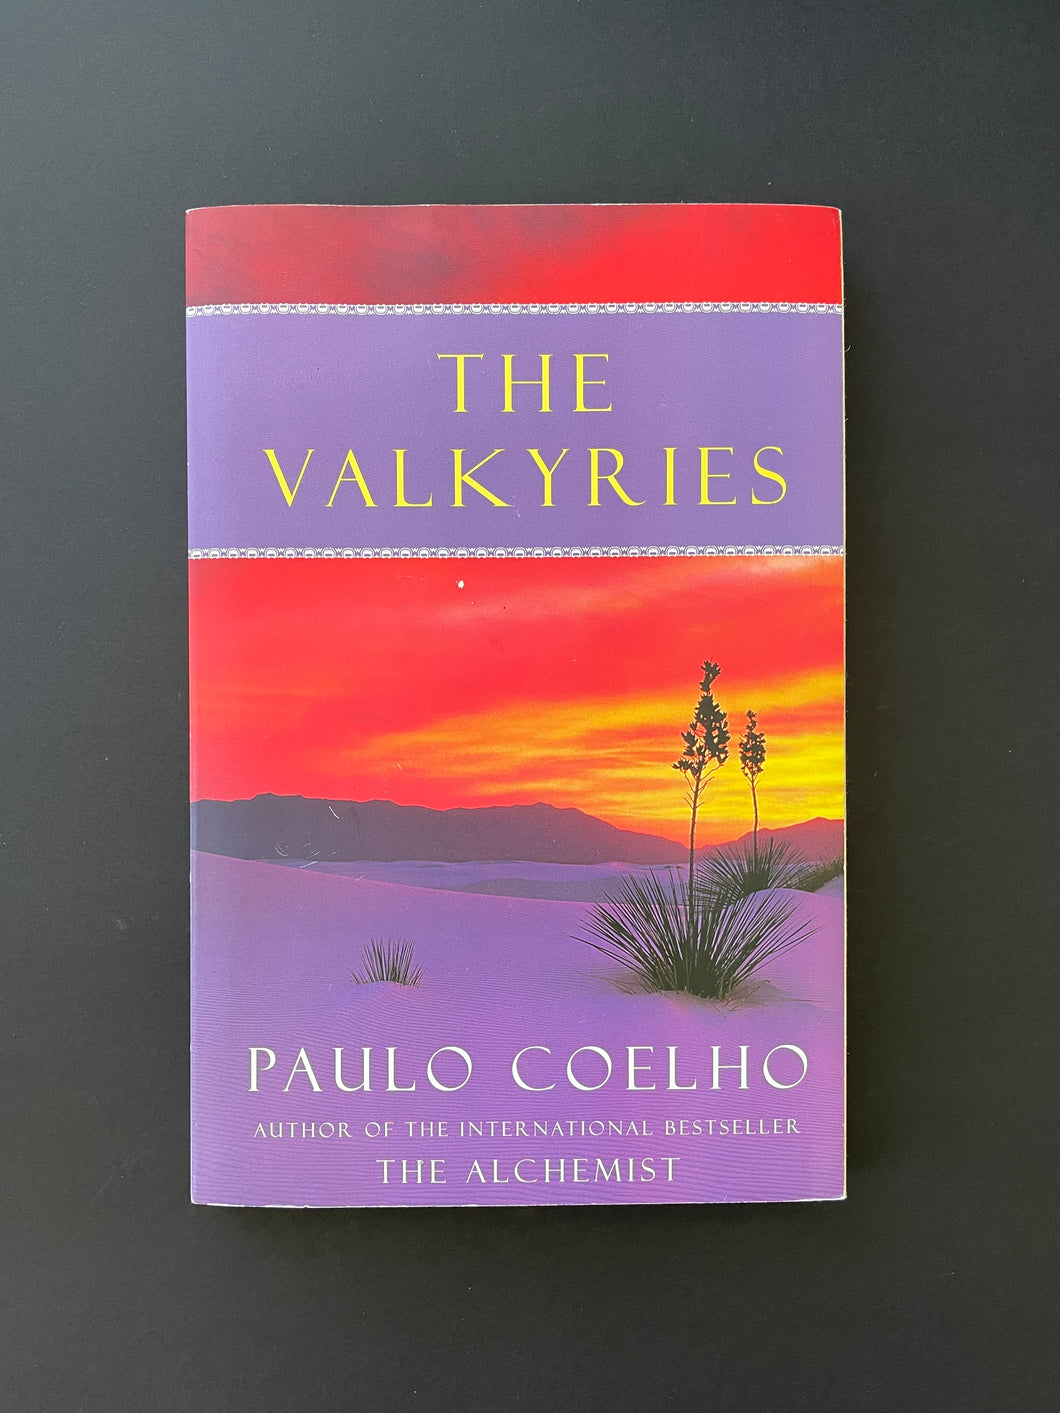 The Valkyries by Paulo Coelho: photo of the front cover which shows very minor scuff marks along the edges.